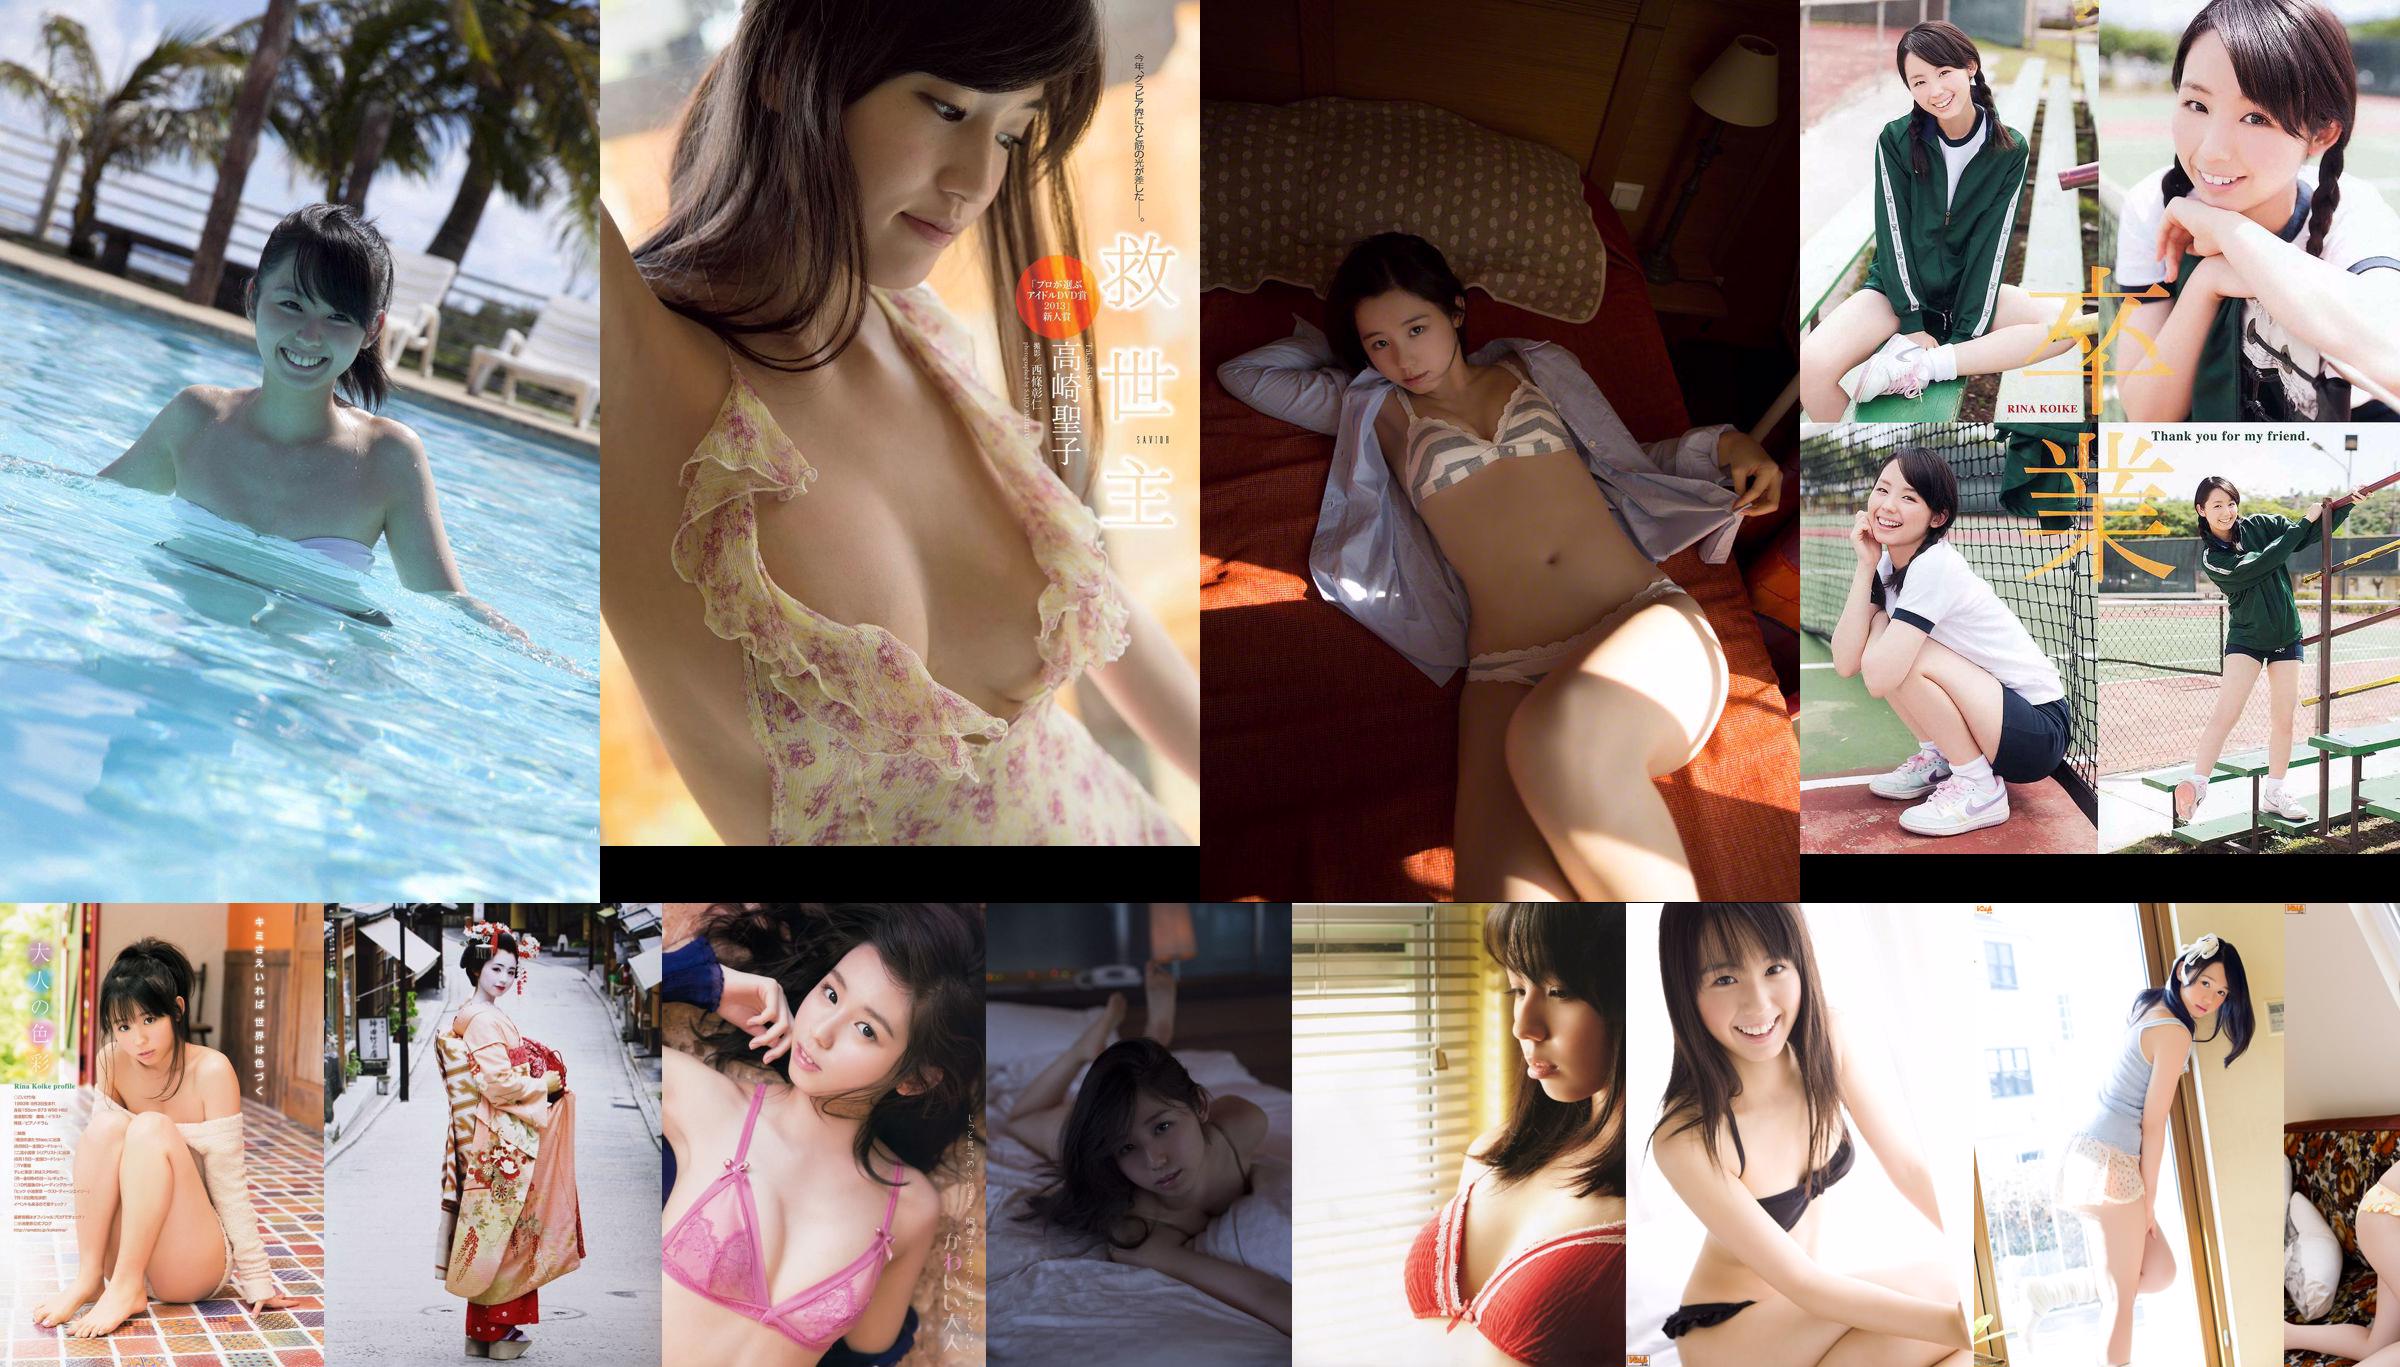 Rina Koike "After Class ヒロイン" [YS Web] Vol.352 No.5df4dd Page 1